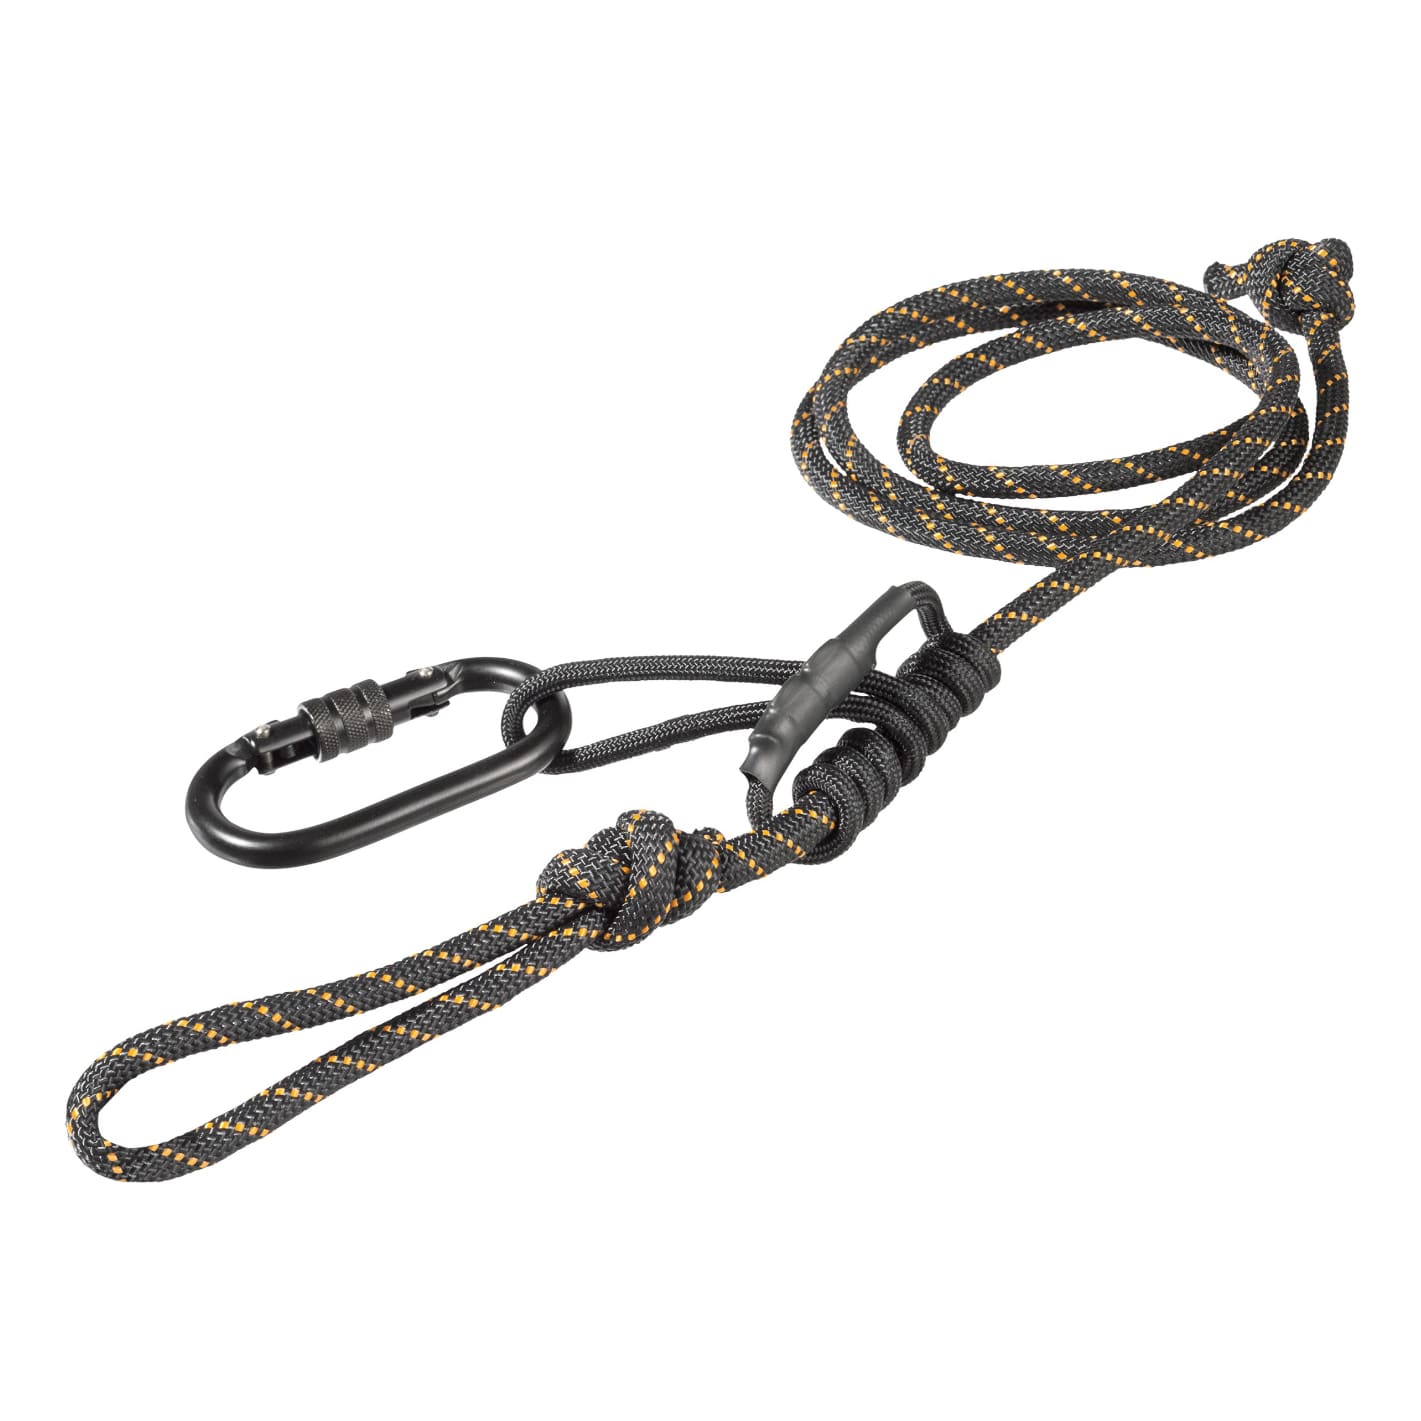 Muddy® Safety Harness Lineman's Rope